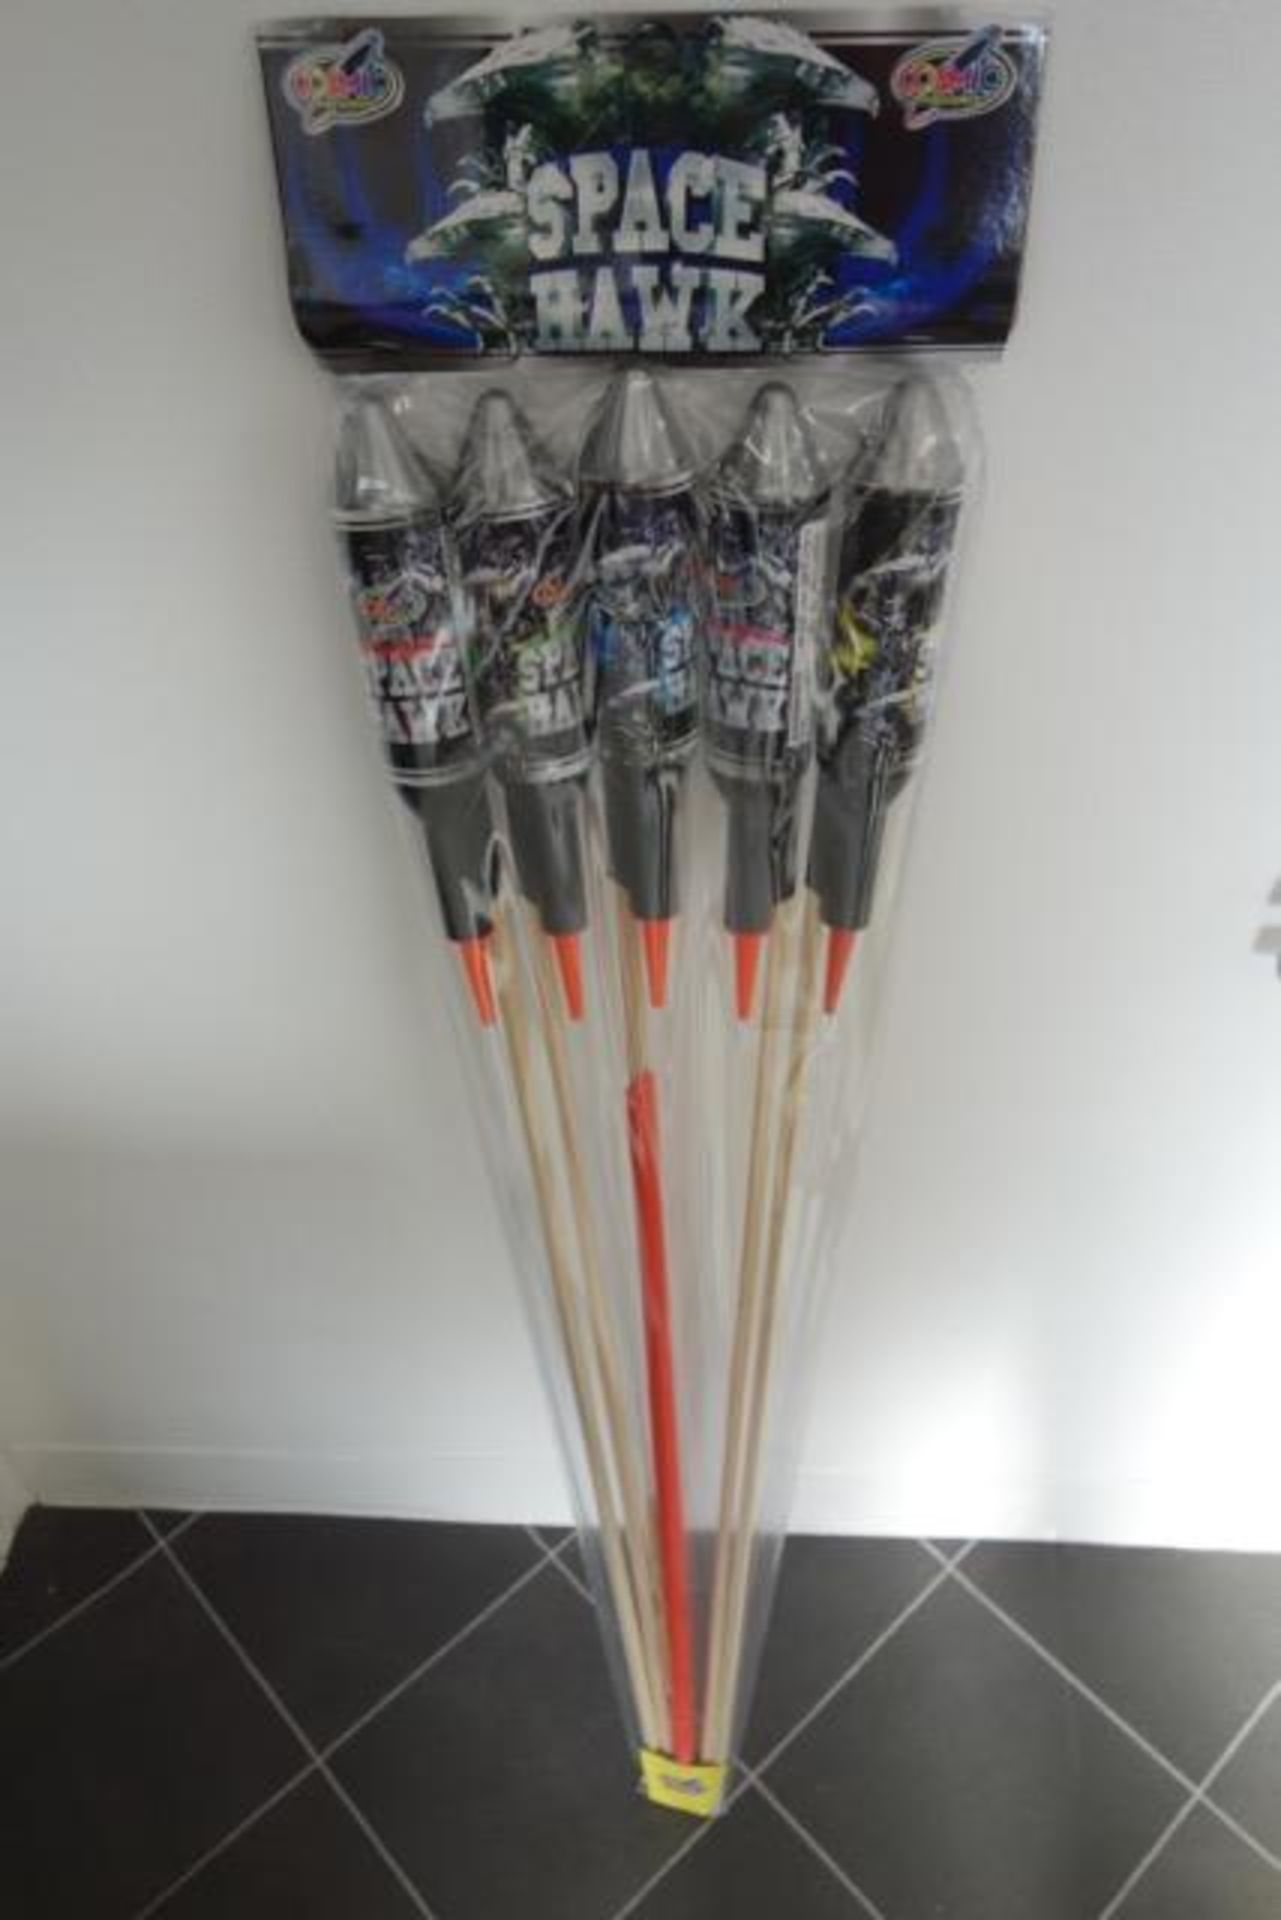 2 x Packs of 5 Space hawk rockets, High quality loud rockets. 'The best around' New and Sealed. £